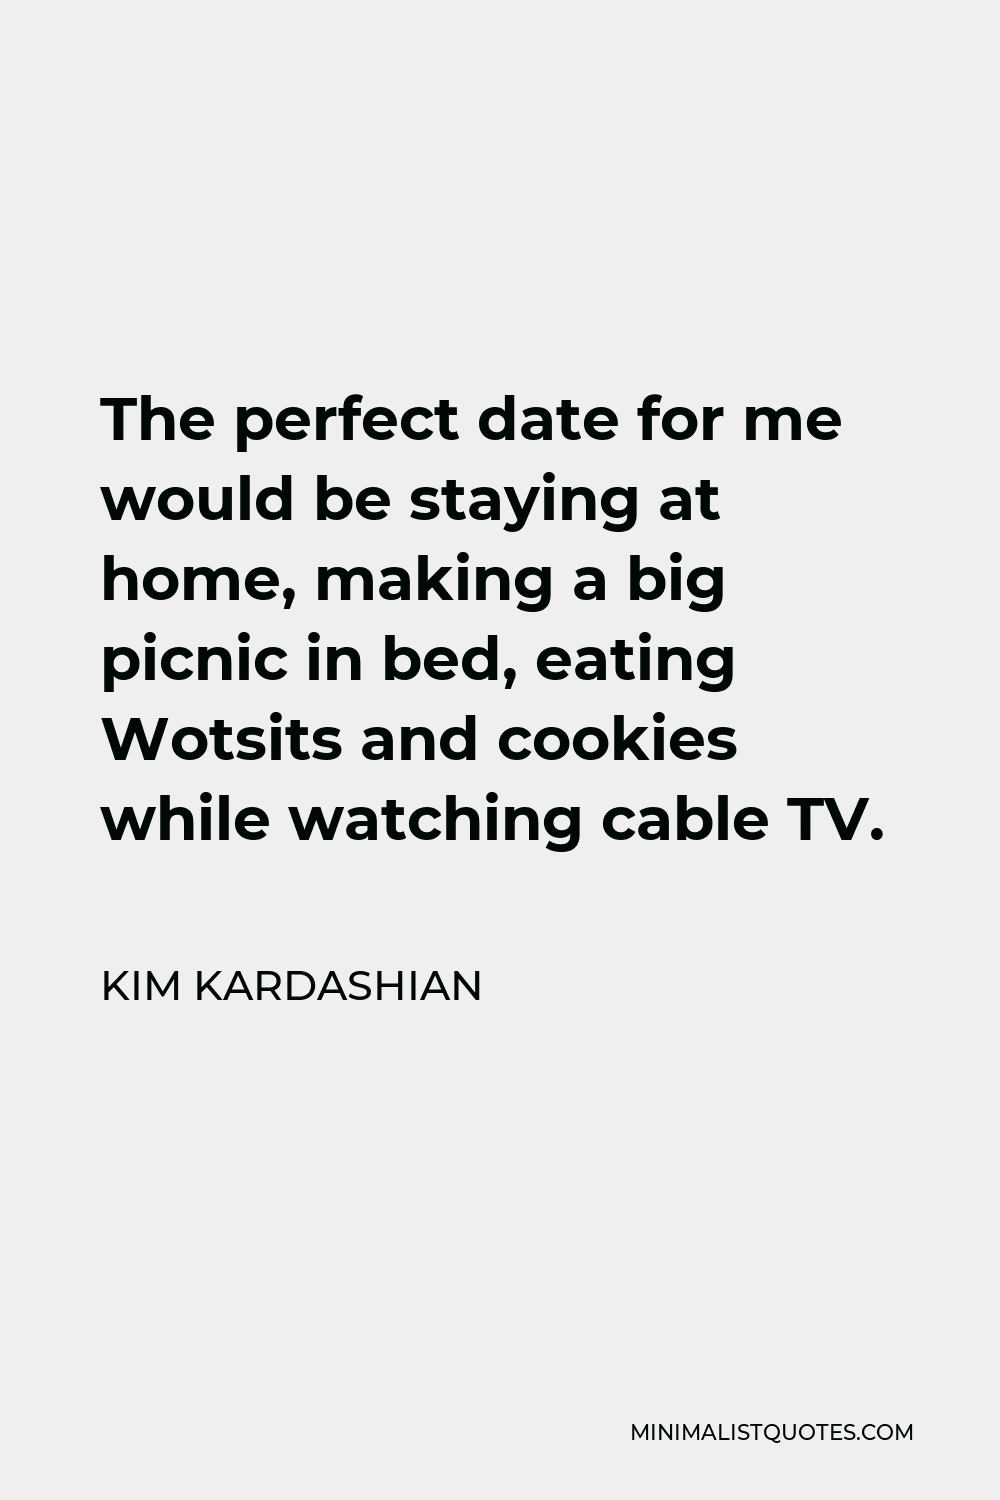 Kim Kardashian Quote - The perfect date for me would be staying at home, making a big picnic in bed, eating Wotsits and cookies while watching cable TV.